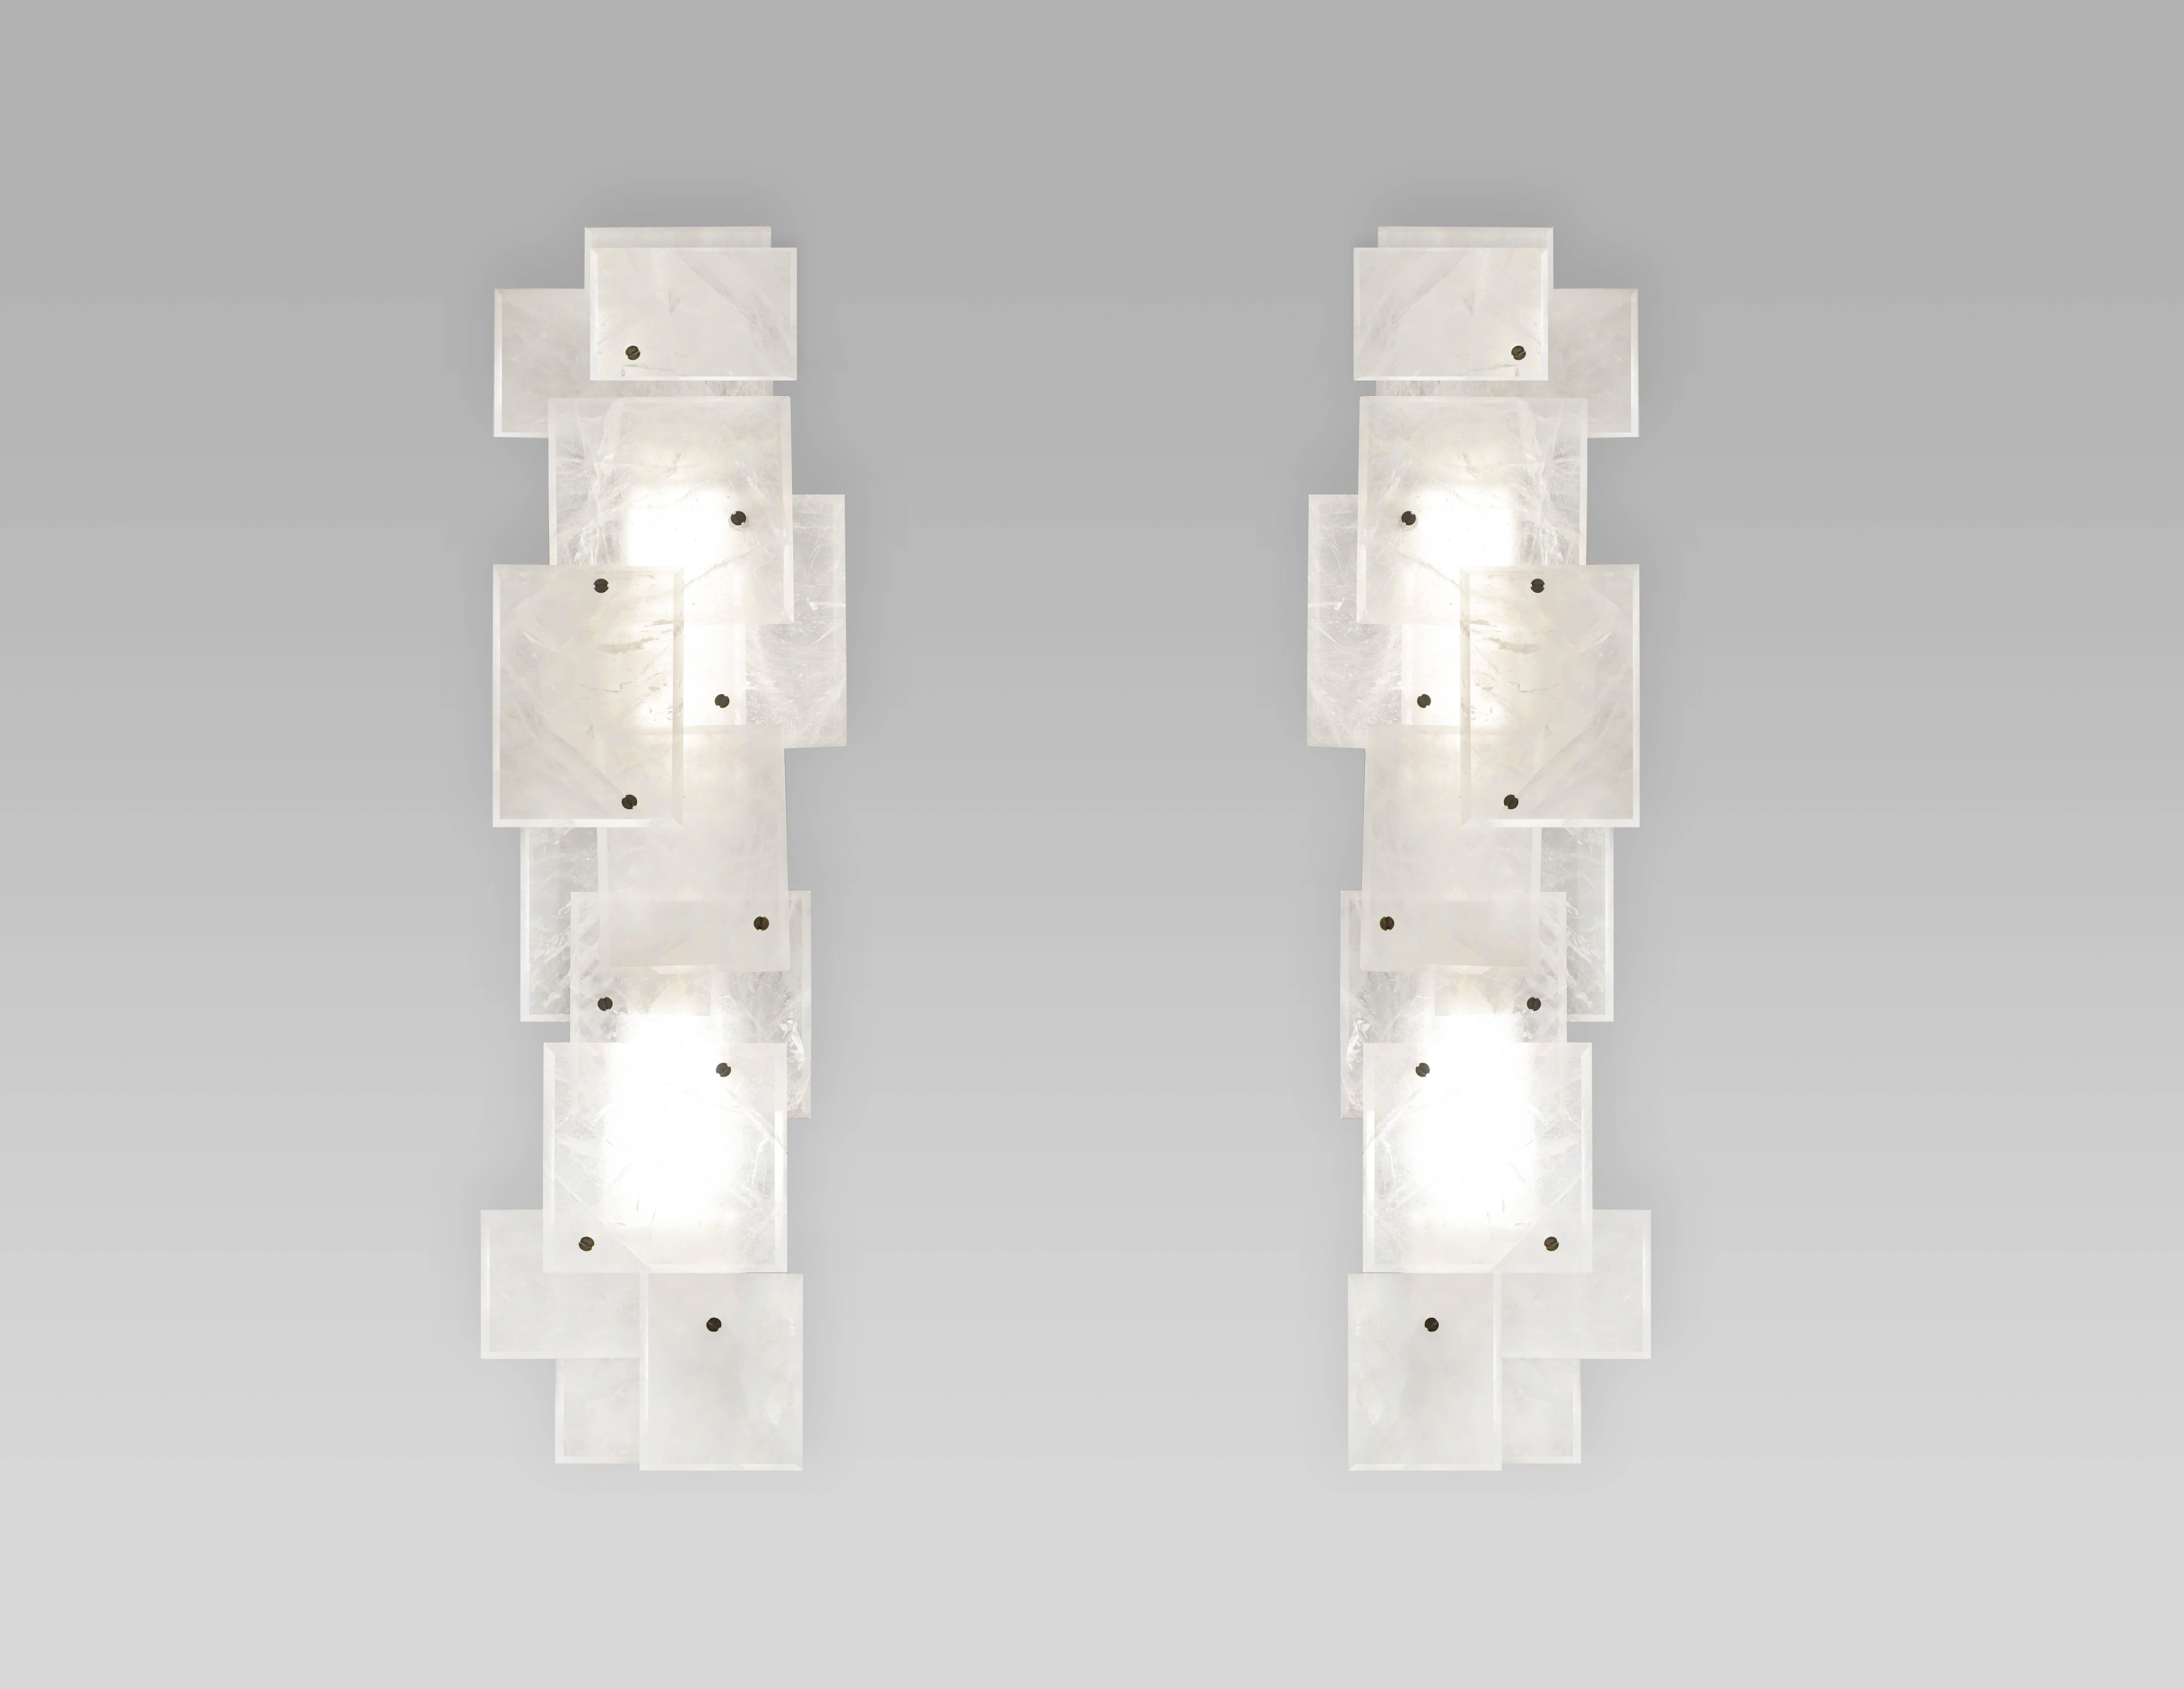 Modern rock crystal quartz sconces with multiple panels decorations in matt nickel finish. Created by Phoenix Gallery.
Each sconce has two sockets, use LED, long tube, warm lights.
Four 60 watts LED, warm lights are included. 
